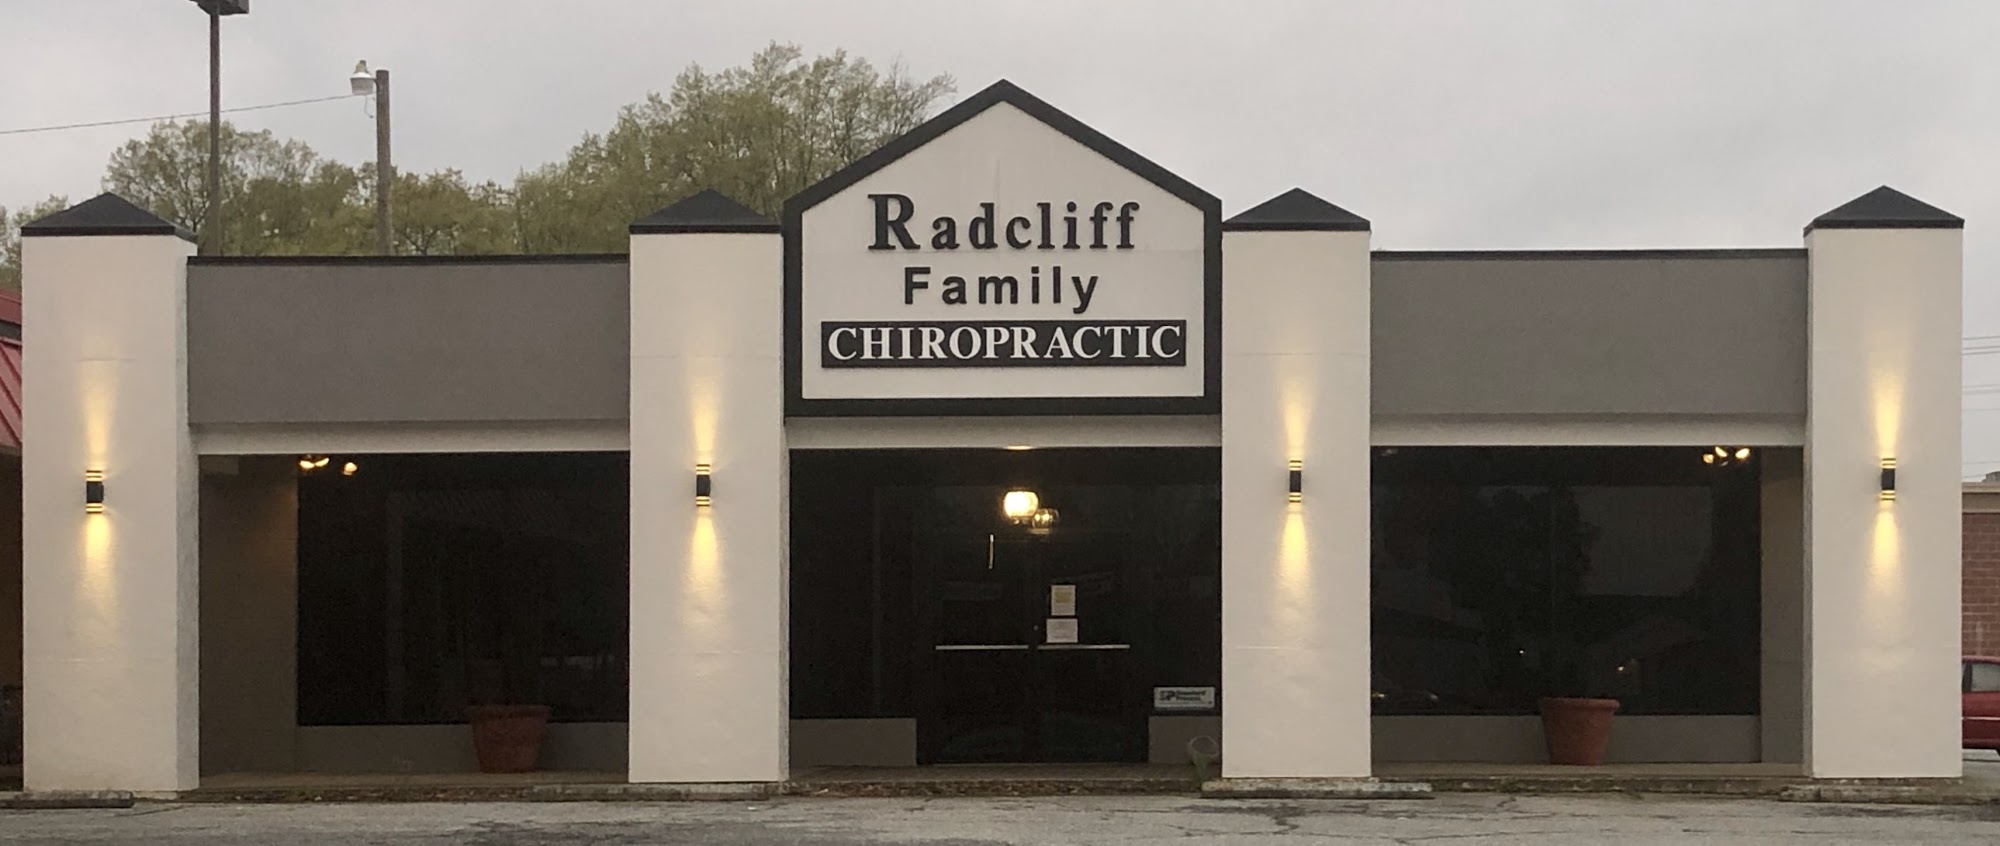 Radcliff Family Chiropractic